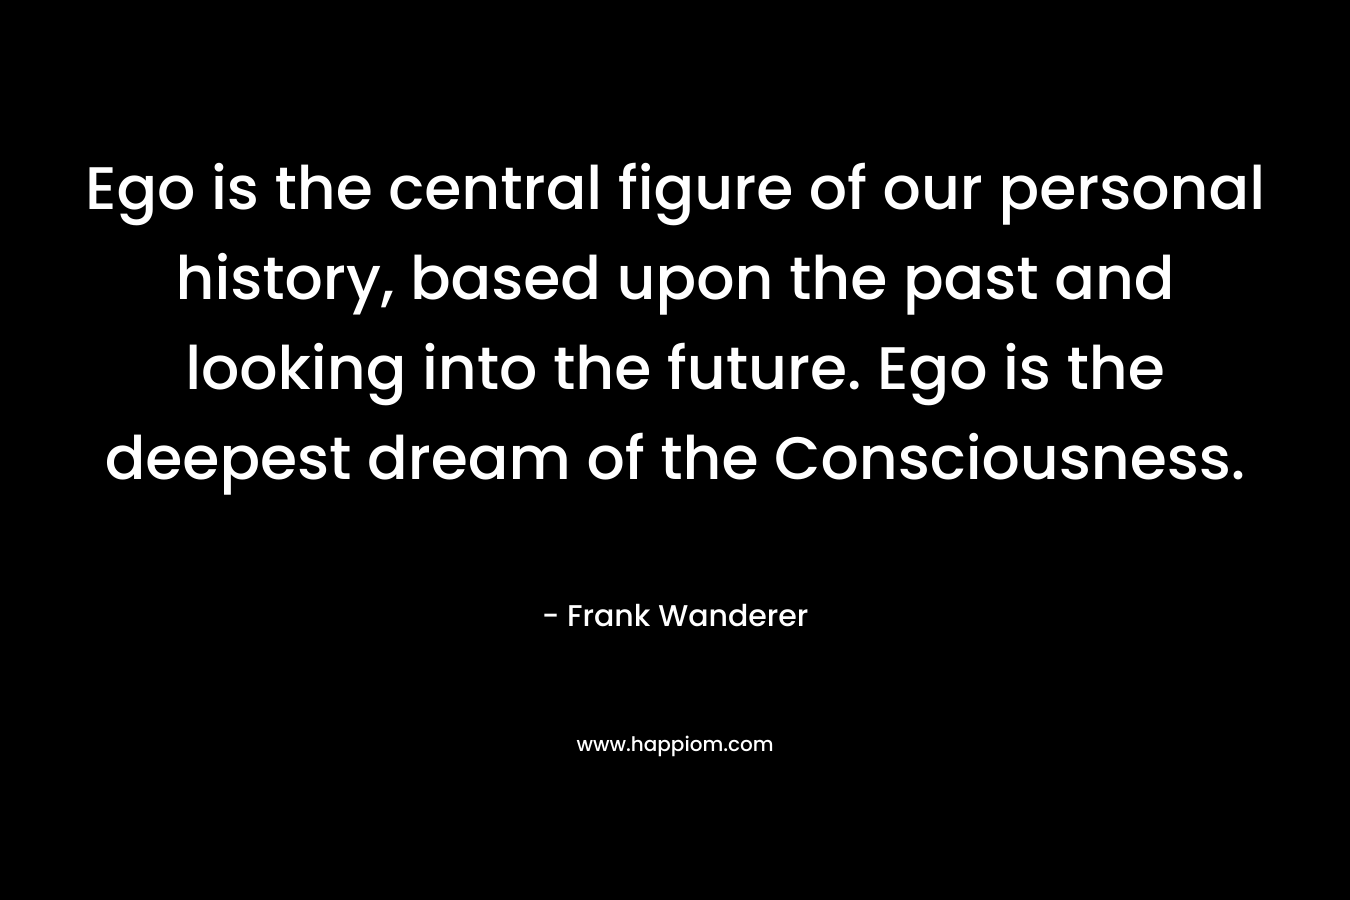 Ego is the central figure of our personal history, based upon the past and looking into the future. Ego is the deepest dream of the Consciousness. – Frank Wanderer